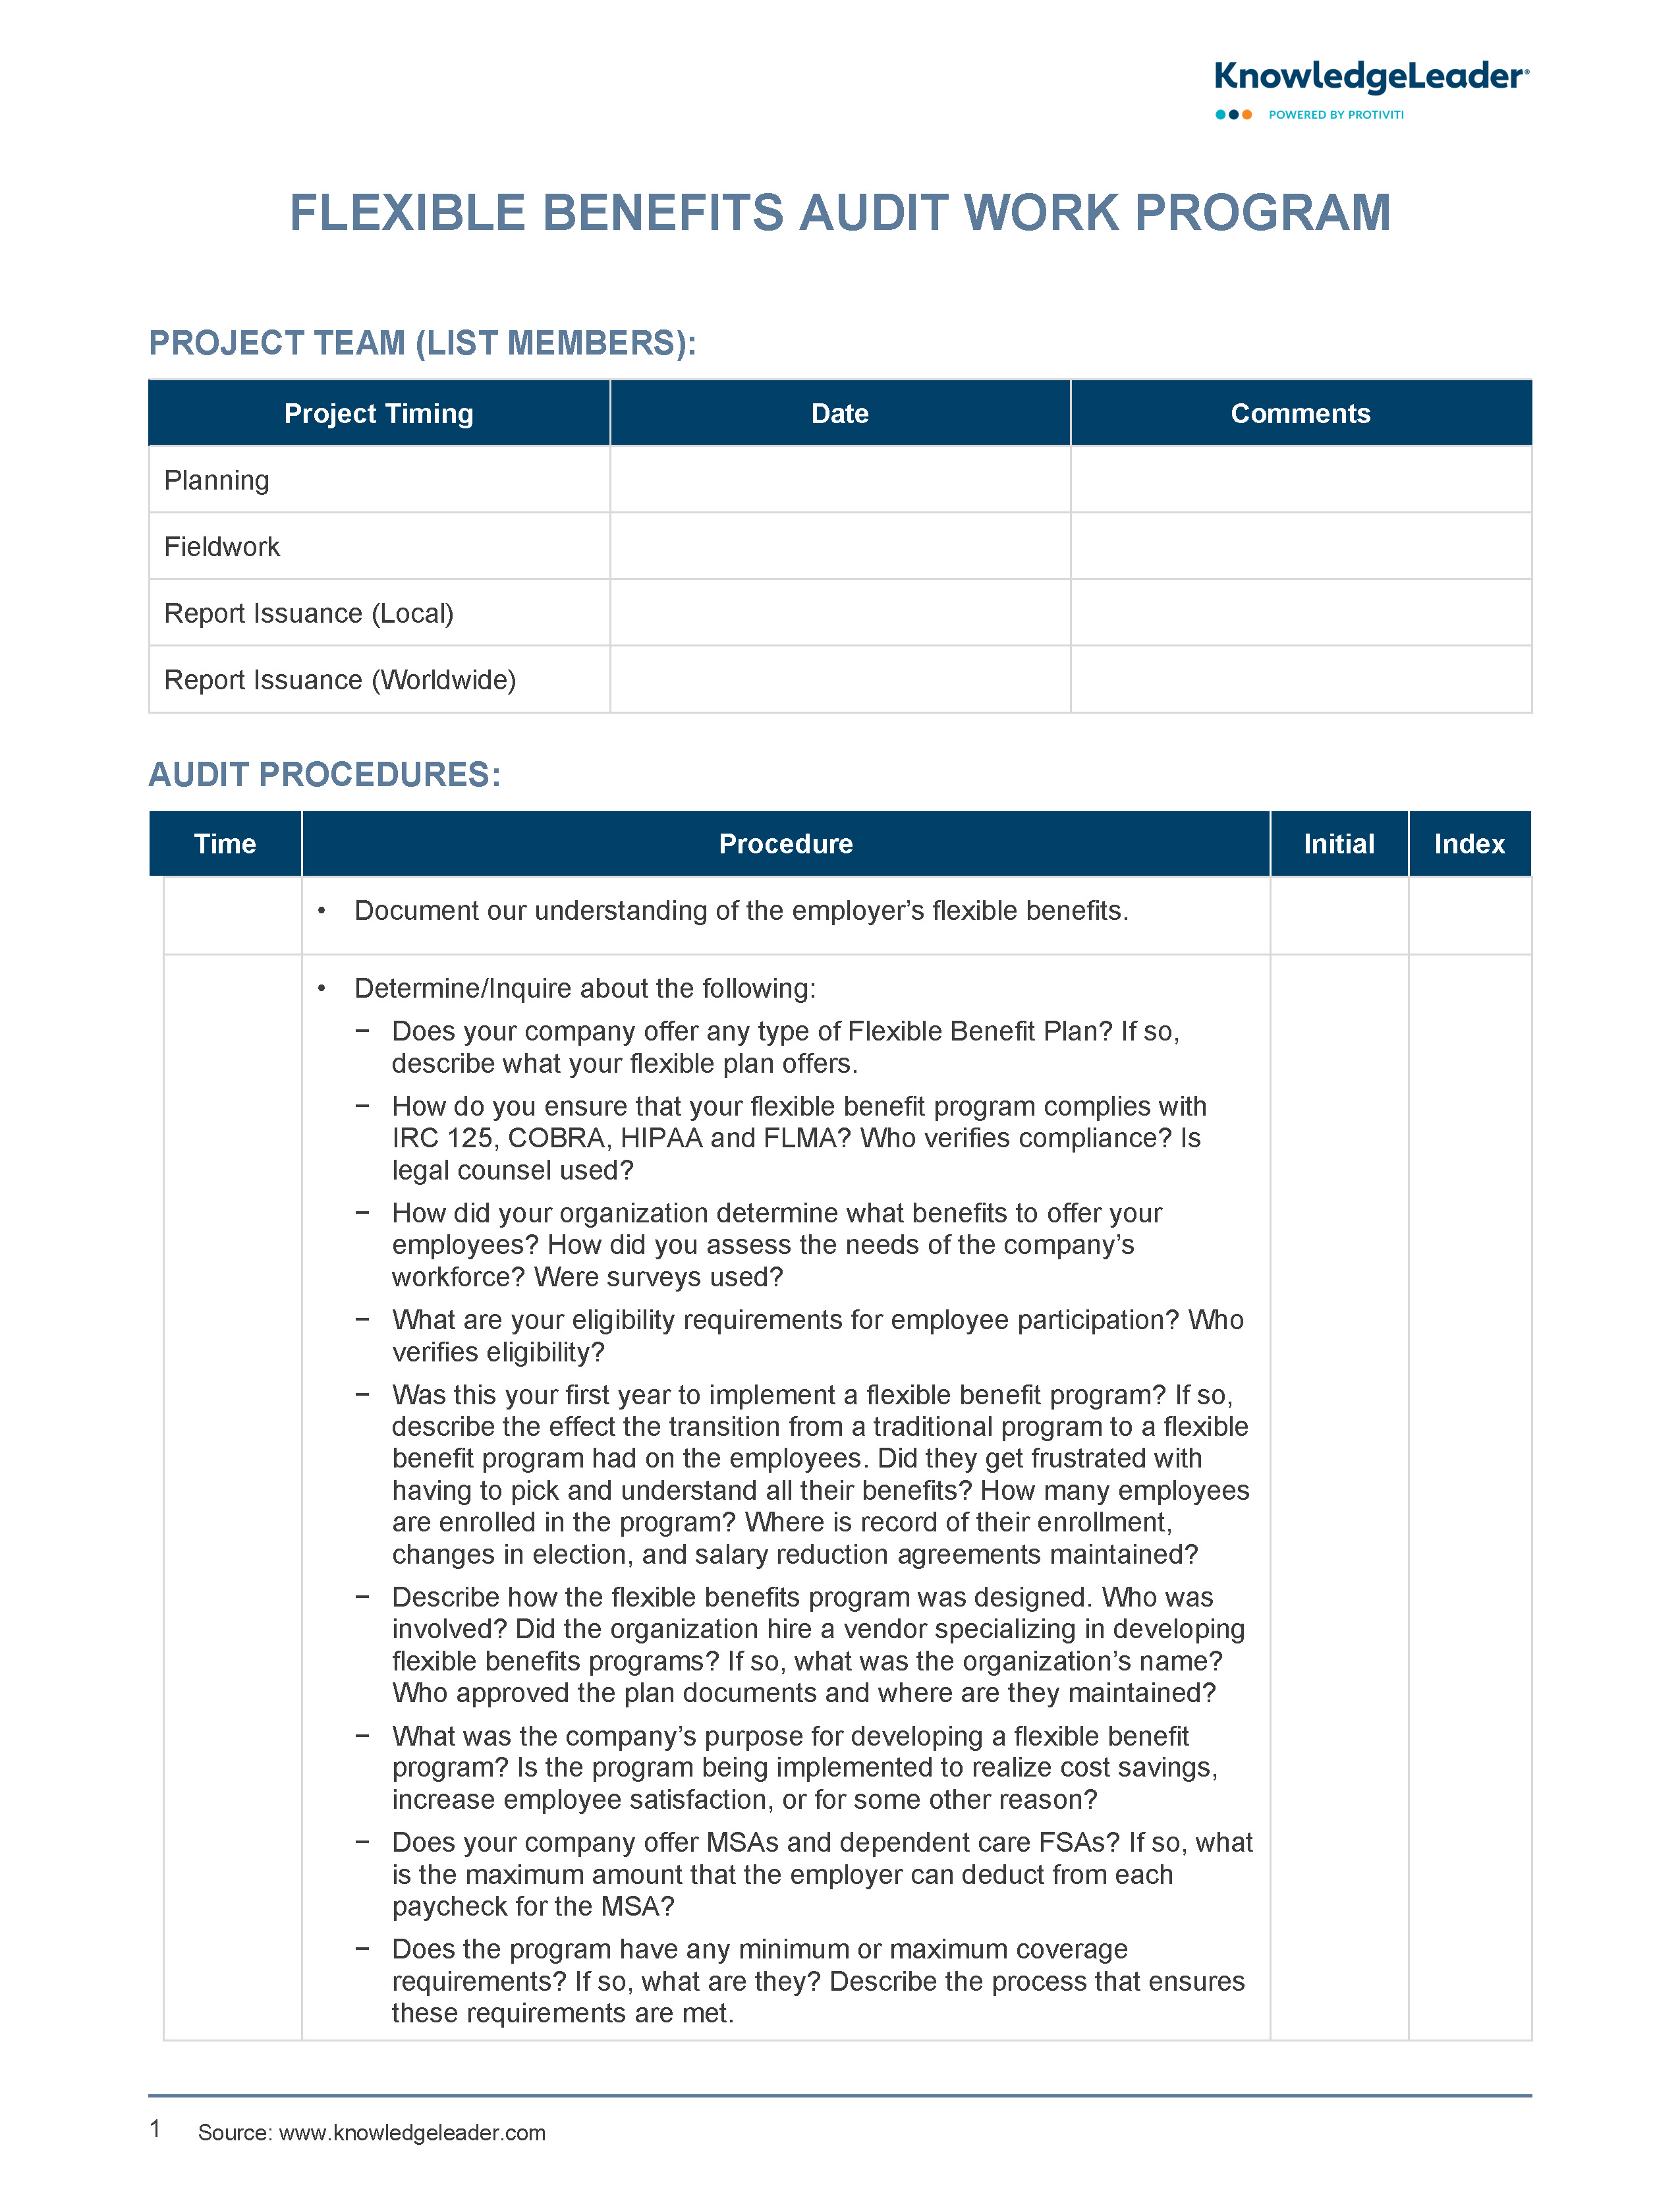 Screenshot of the first page of Flexible Benefits Audit Work Program